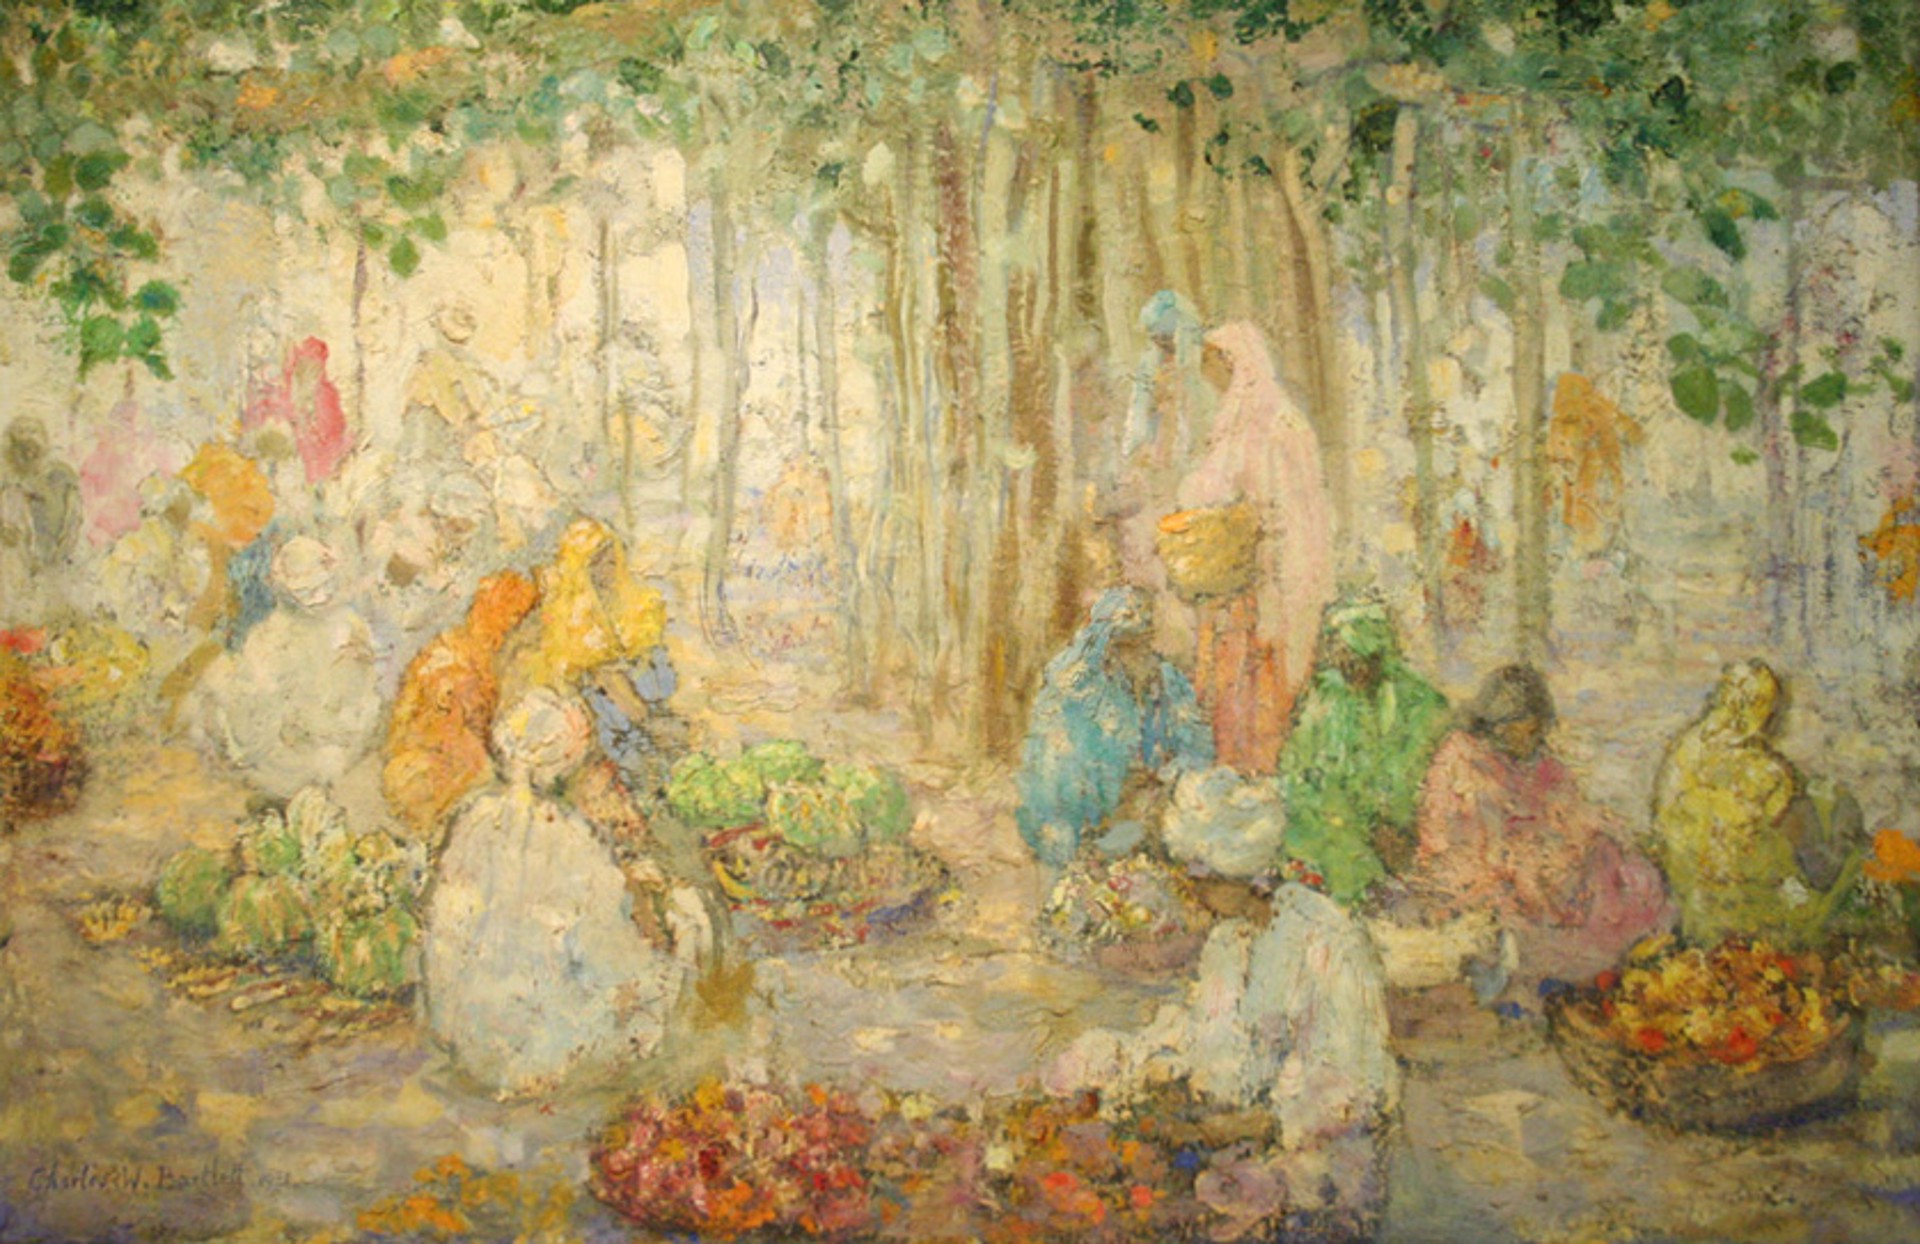 Under the Banyan Tree by Charles Bartlett